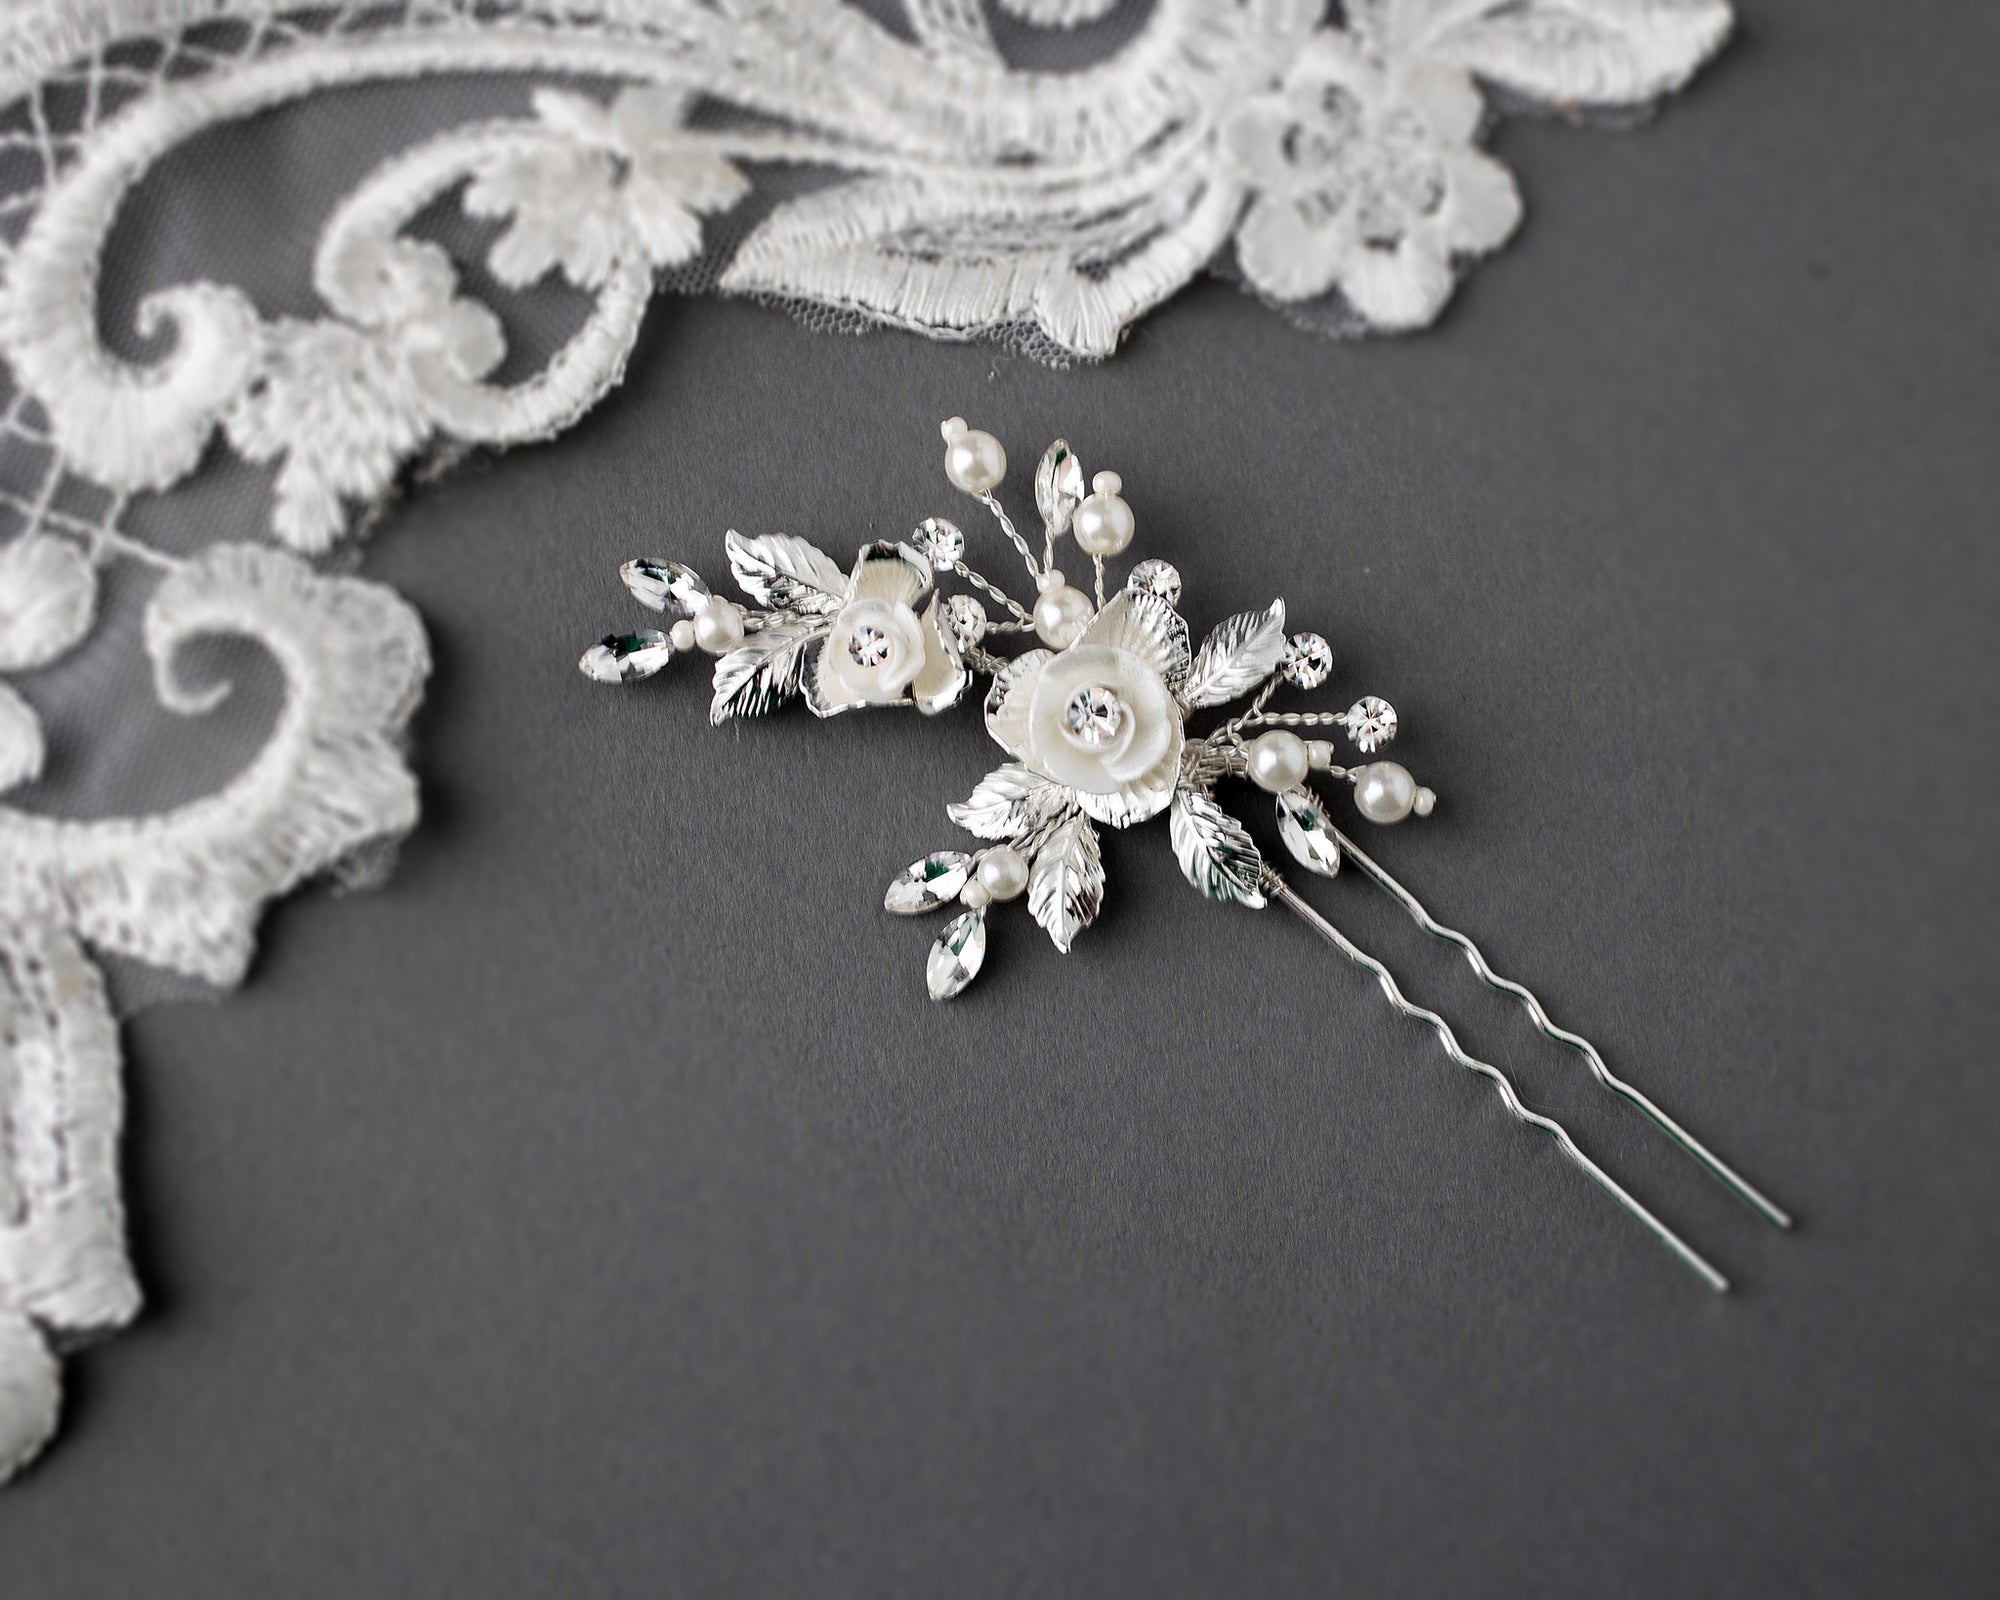 This stunning hair pin features bright porcelain flowers in ivory, adorned with marquise crystal stones for a sophisticated look that adds a subtle sparkle to your bridal hairstyle. Crafted from silver or light gold leaves and petals, this decorative piece measures 2.75 by 1.75 inches, making it the perfect choice for any blushing bride.